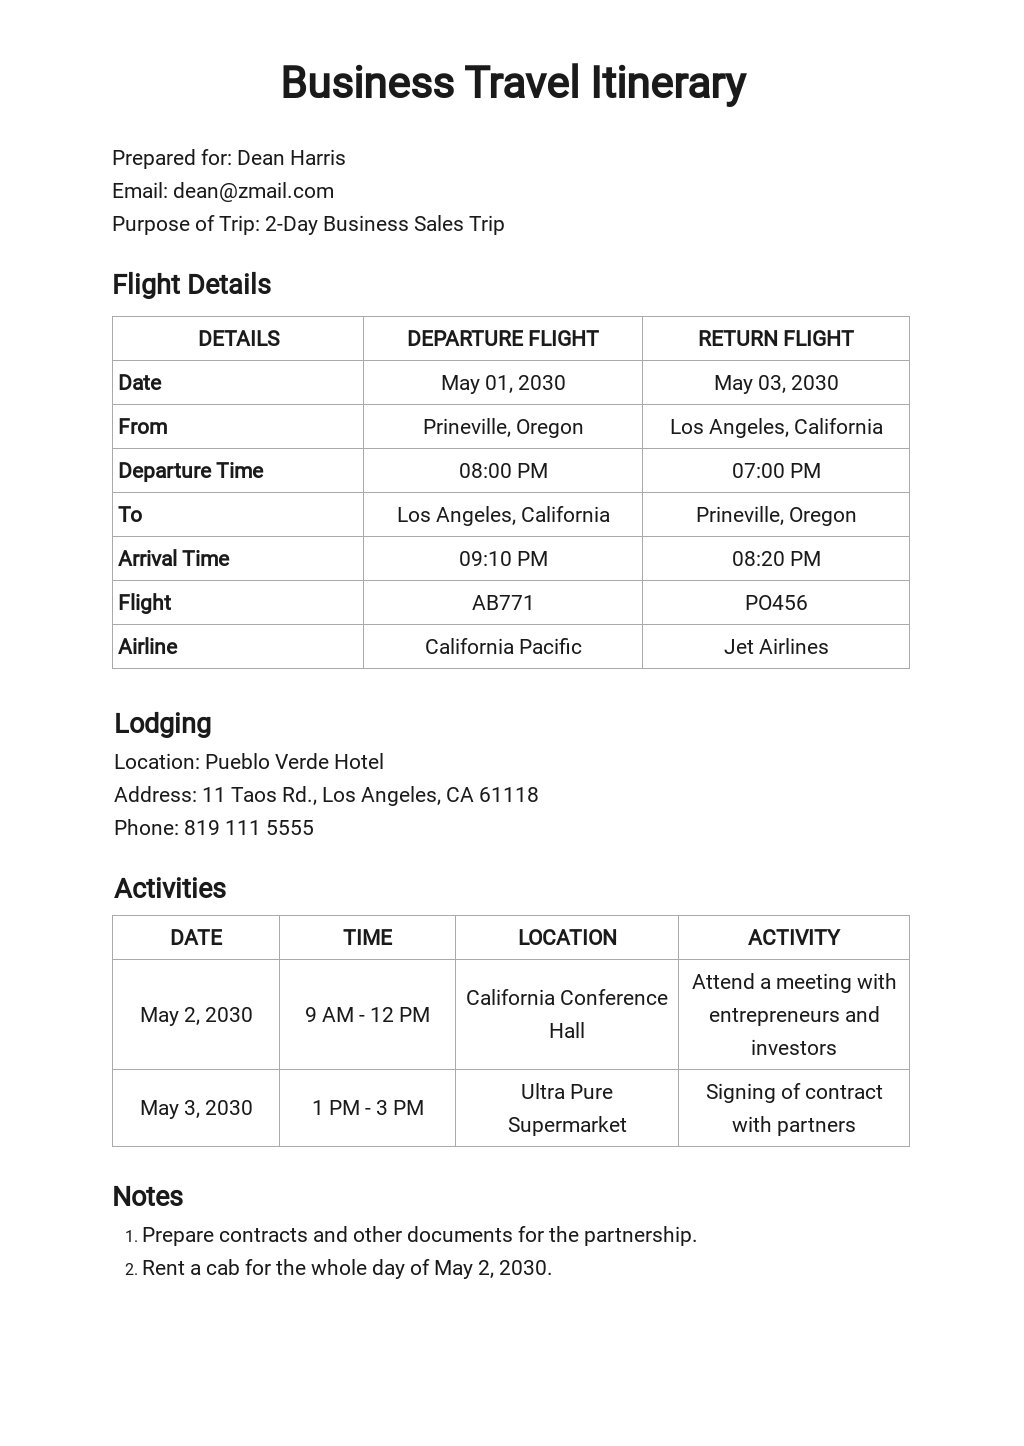 Business Travel Itinerary Template - Google Docs, Word  Template.net With Regard To Business Travel Itinerary Template Word